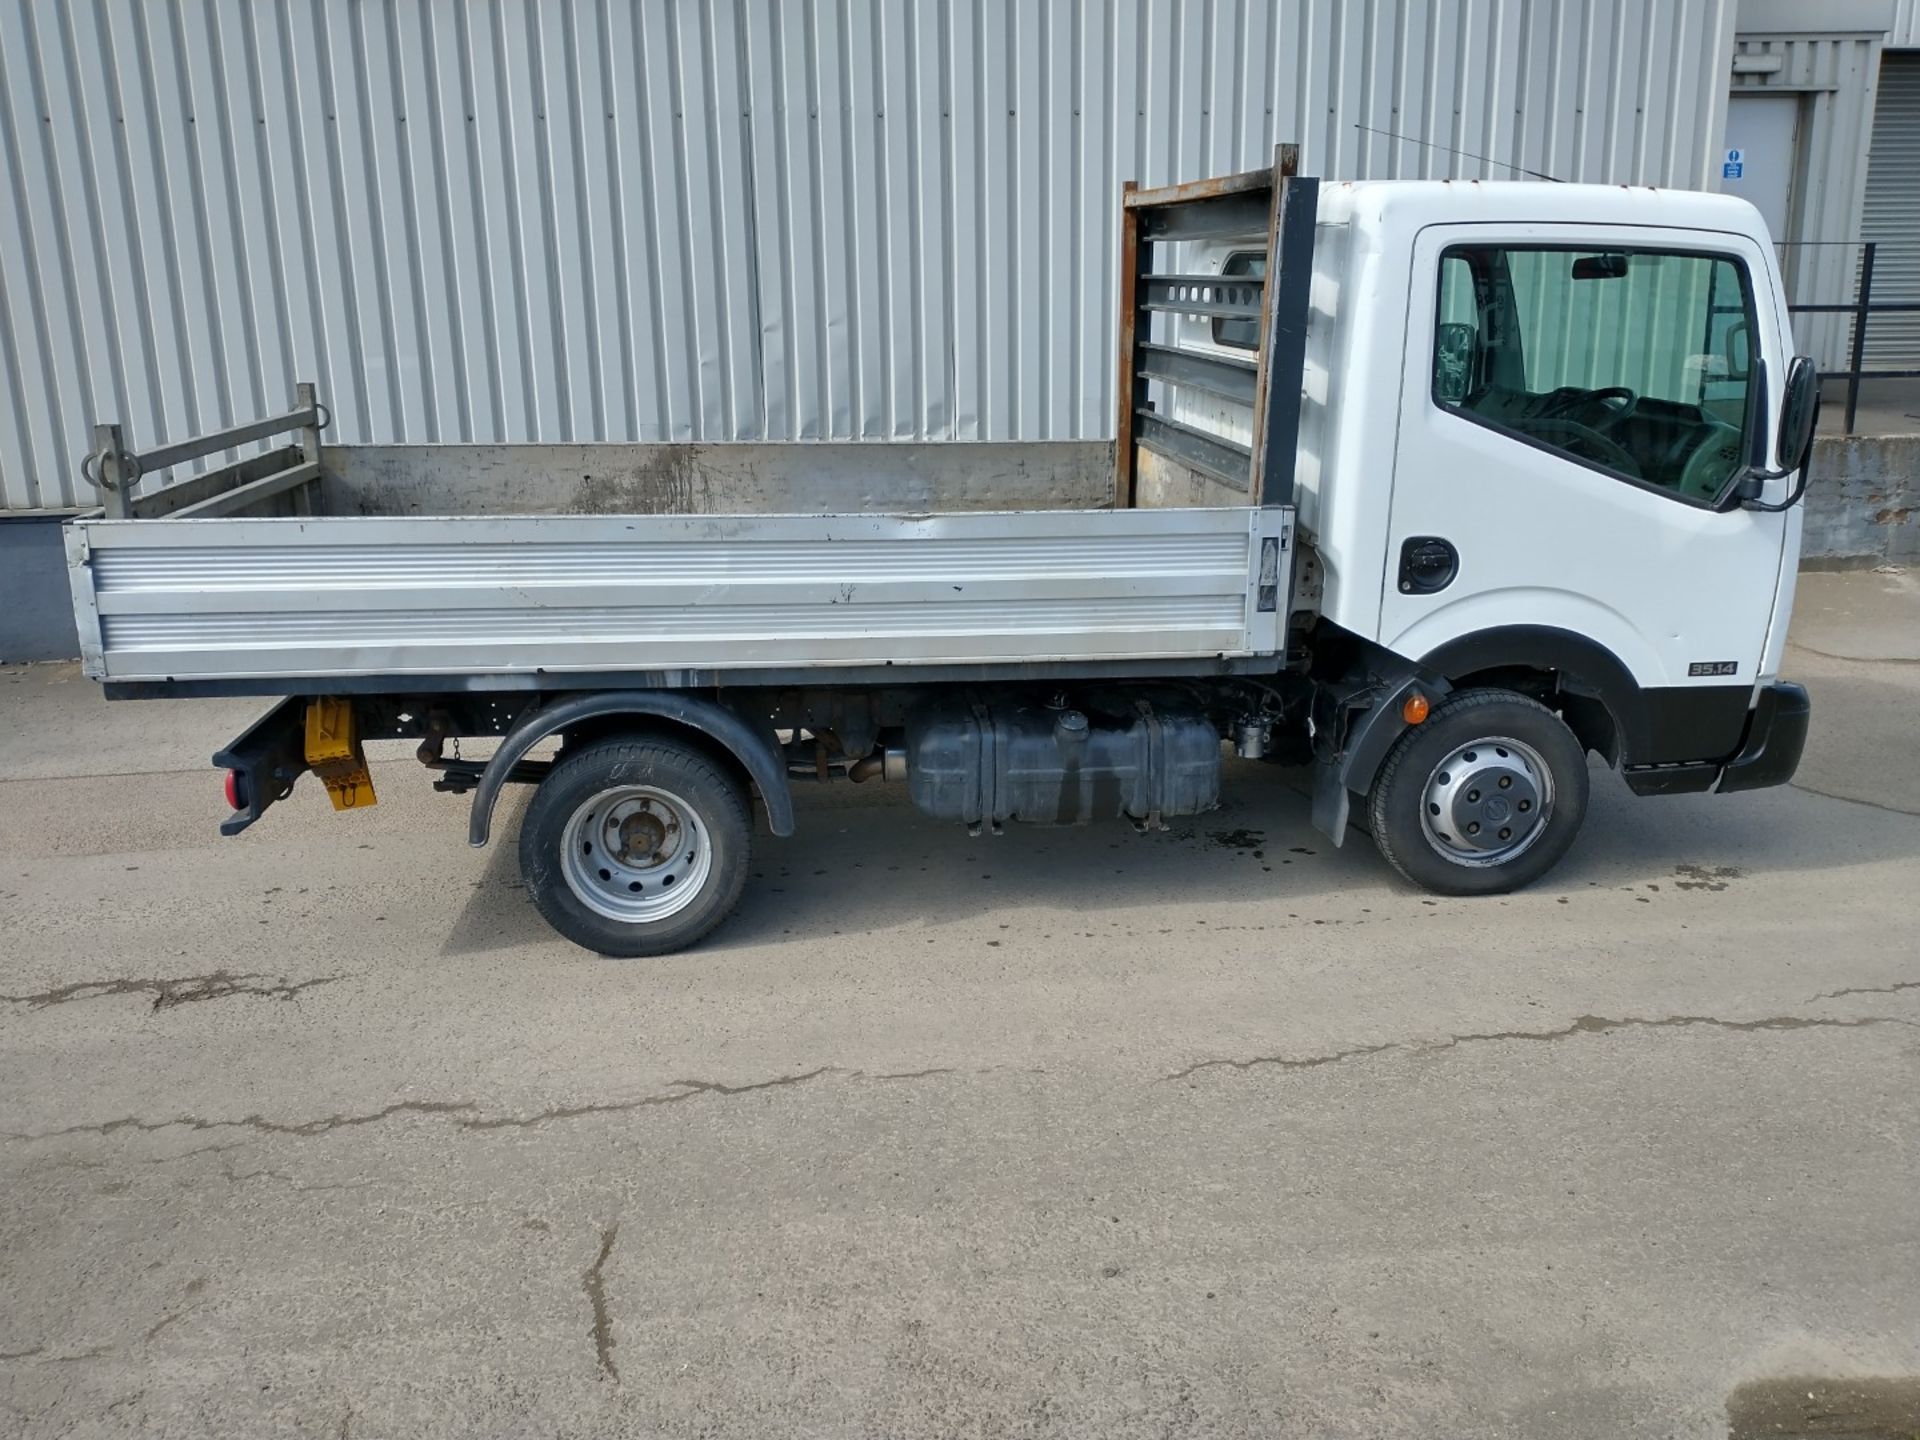 2013 Nissan Cabster 2.5 DCI 35.14 Dropside Truck - CL505 - Location: Corby, - Image 4 of 13